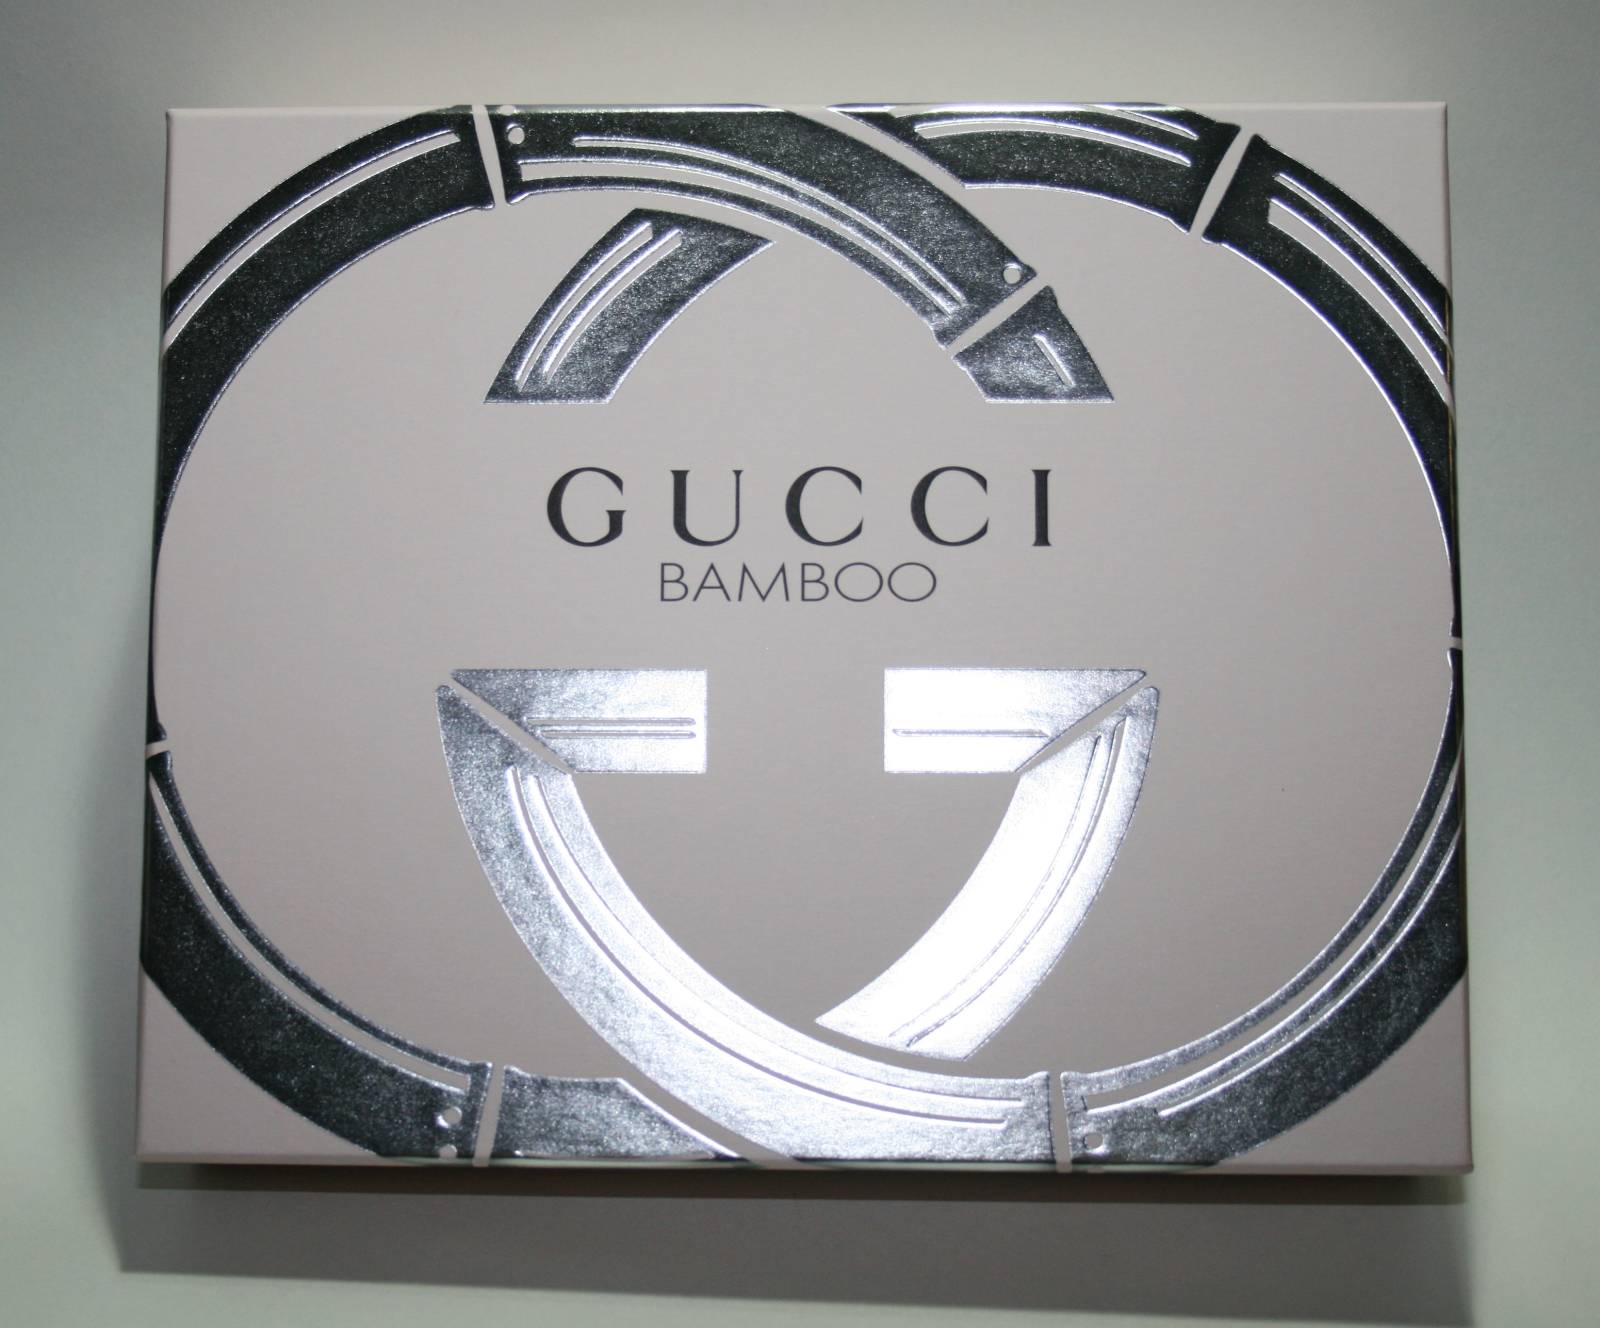 12 Gifts of Christmas: Gucci Bamboo EDP Gift Set for Her